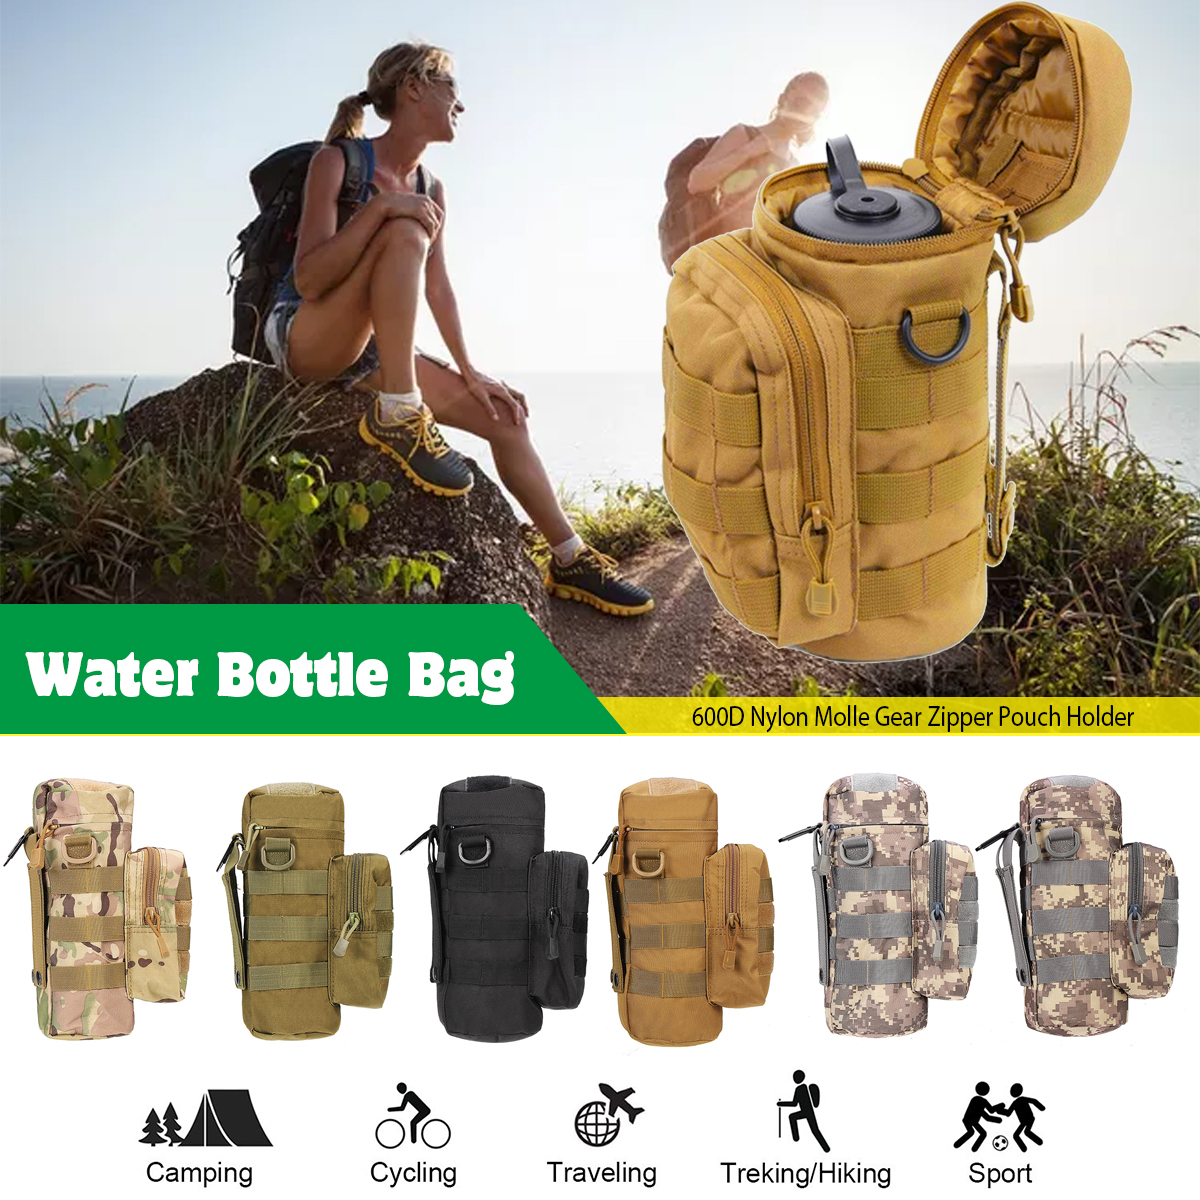 Multifunctional-Water-Bottle-Bag-Outdoor-Tactical-Bag-Sports-Hiking-Climbing-Package-Kettle-Bag-1484982-1